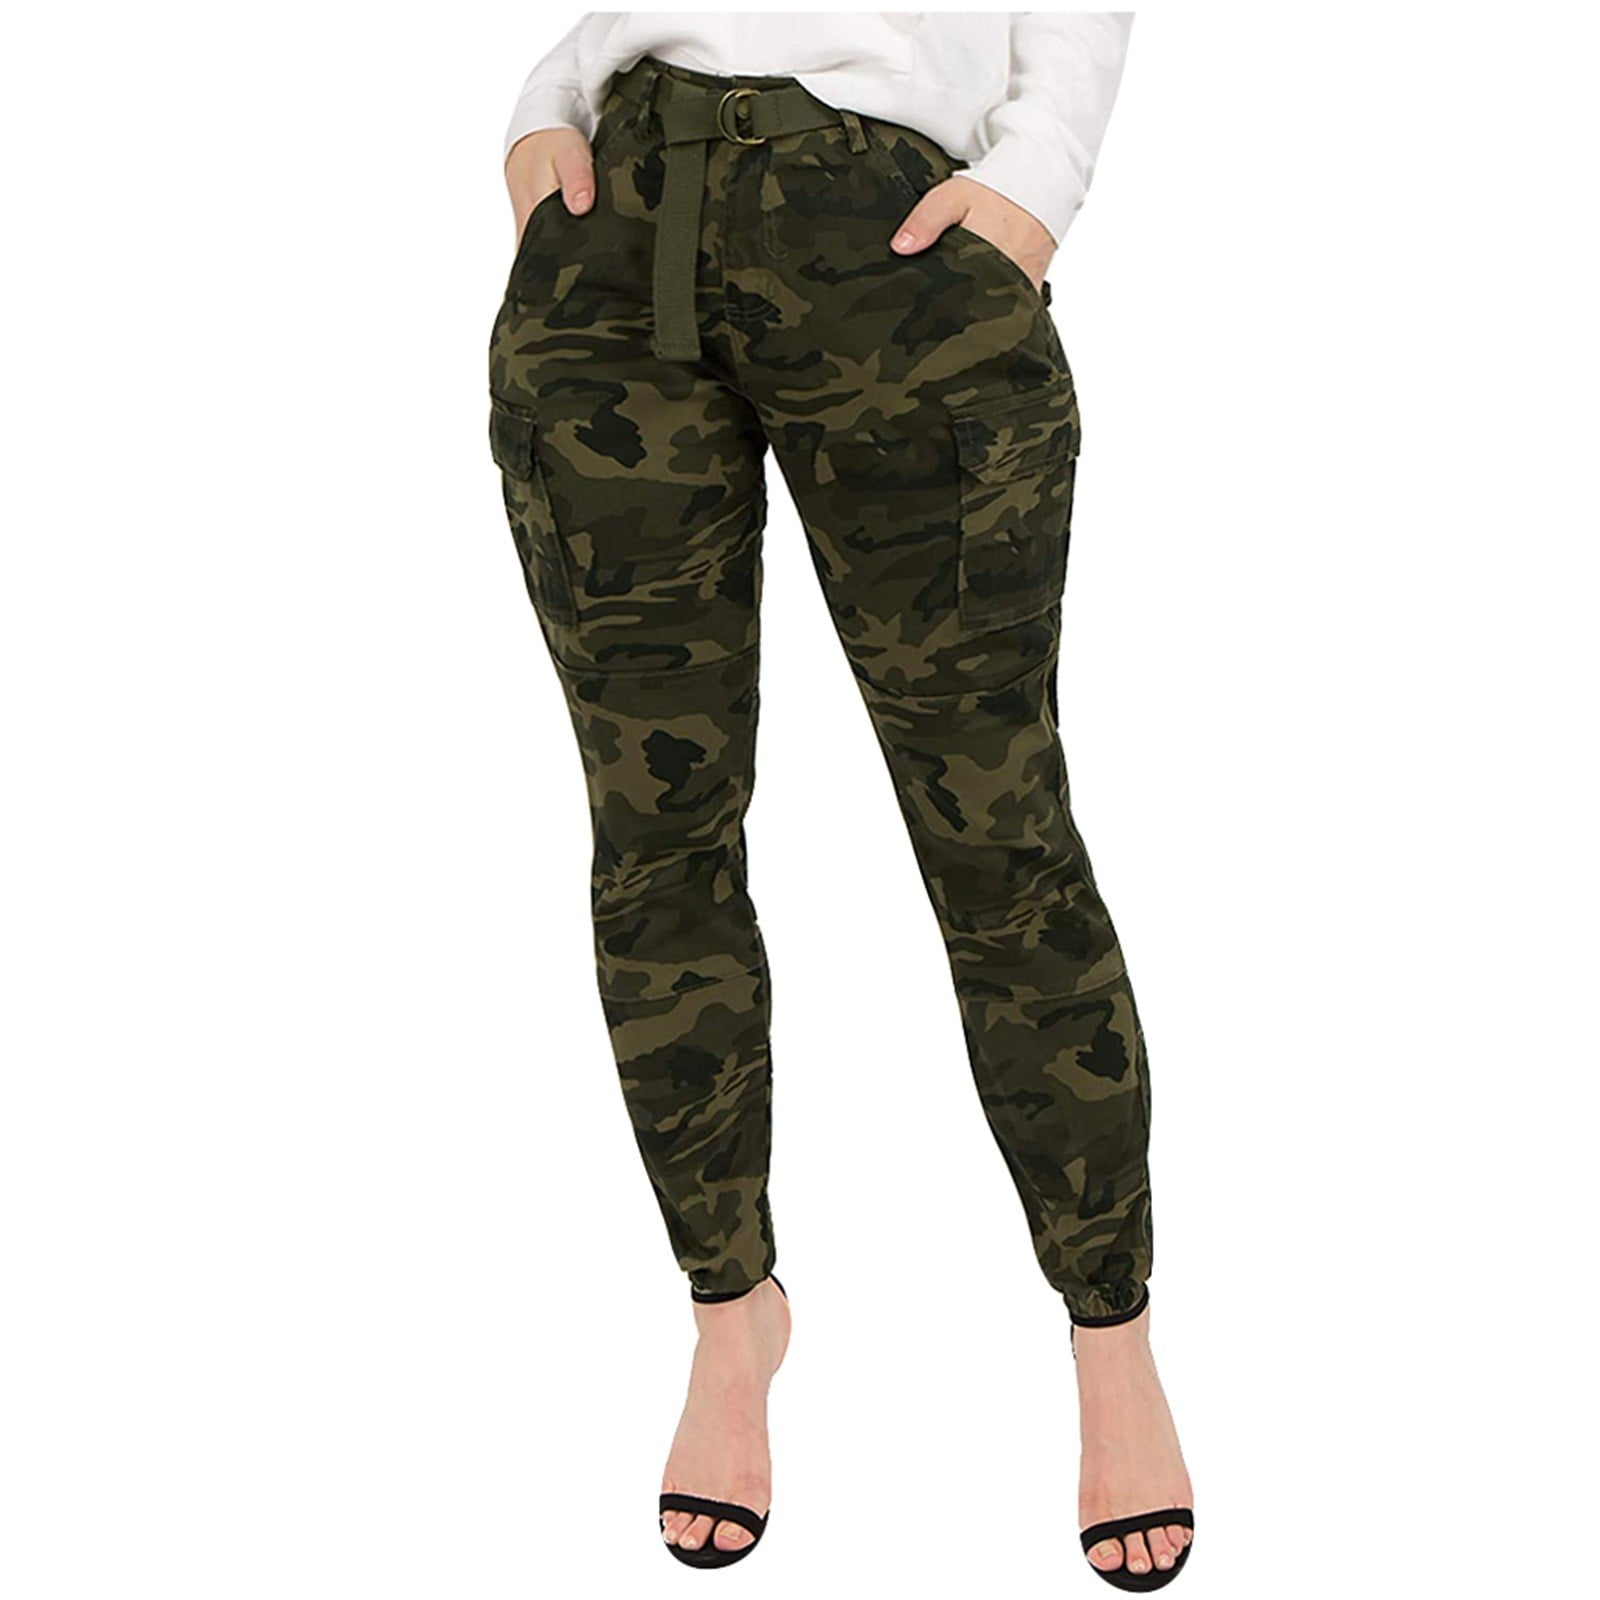 Fsqjgq Women's Stretchy Straight Dress Pants with Pockets Plus Size  Leggings for Women Retro Cargo Pants with Pockets Outdoor Casual Ripstop  Camo